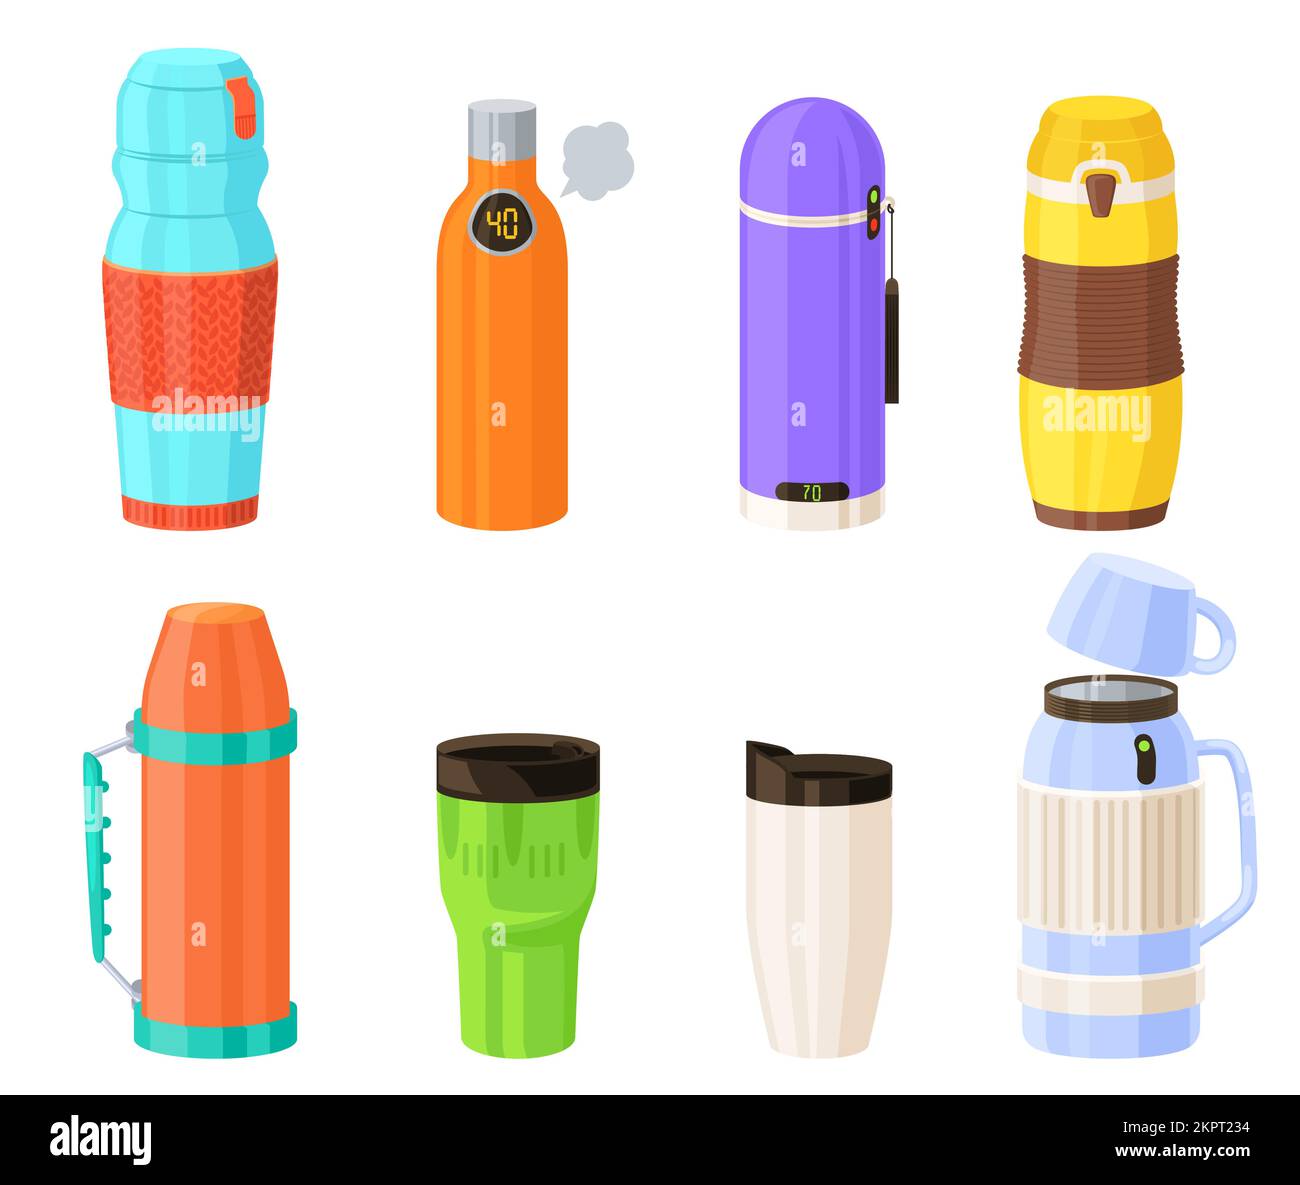 https://c8.alamy.com/comp/2KPT234/thermos-cartoon-vector-thermo-cup-isolated-set-reusable-flask-for-hot-coffee-warm-tea-and-water-illustration-plastic-and-vacuum-stainless-steel-bo-2KPT234.jpg